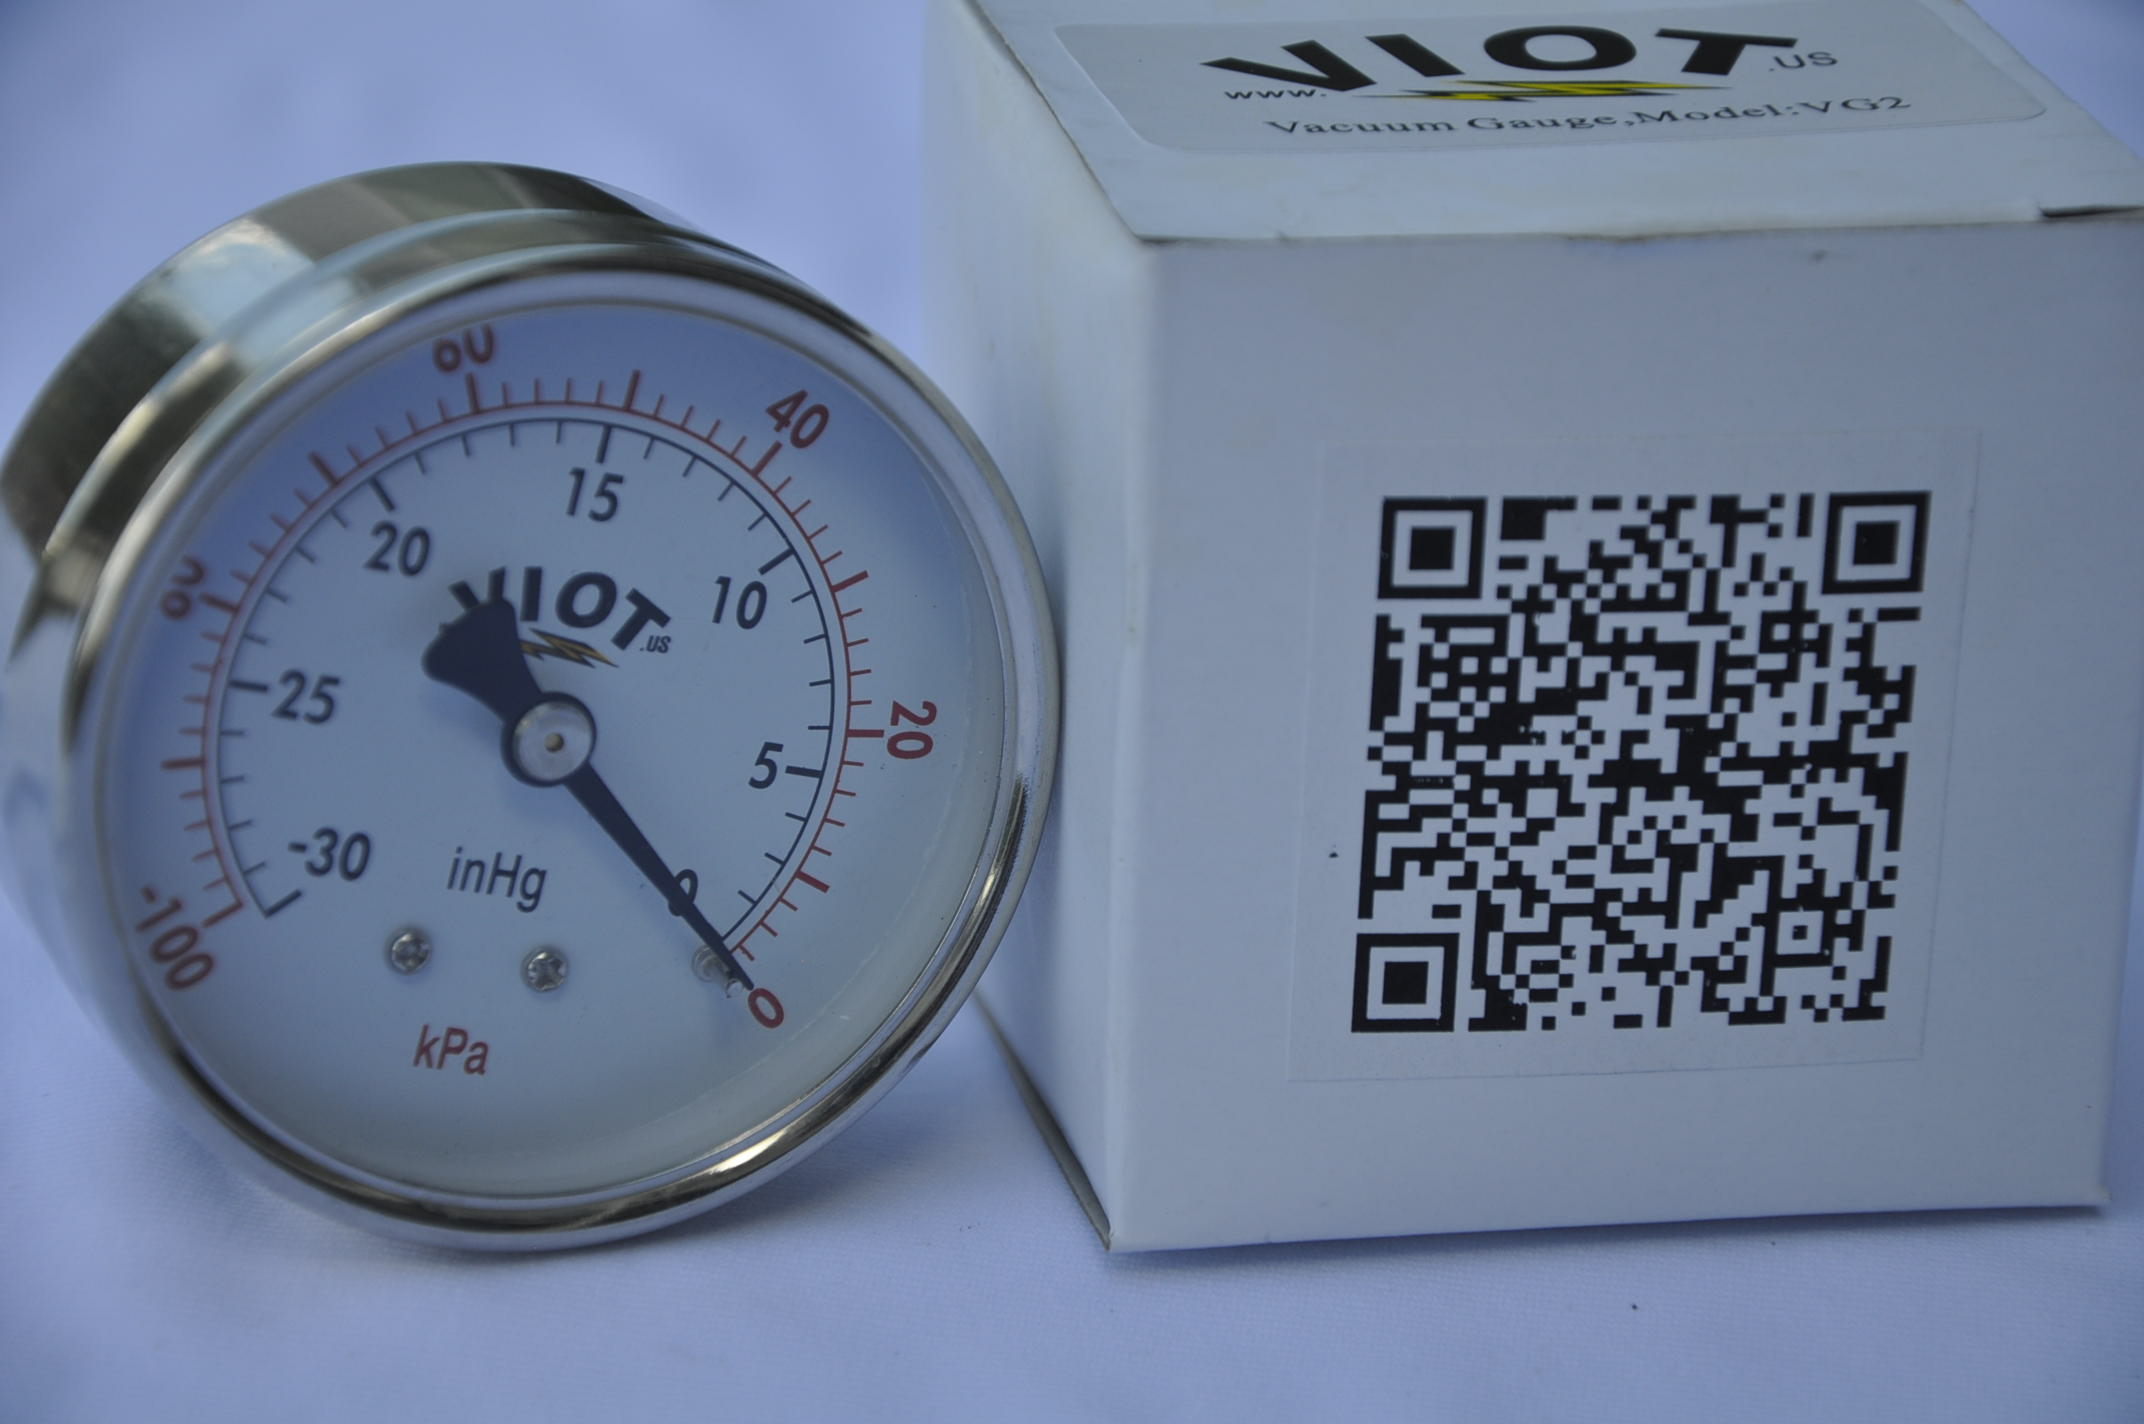 full scale Analog Vacuum Gauge, from 0 to -30 inch Hg/0 to -100 kPa, large 2 inch face SS case 1/4 NTP male connector on